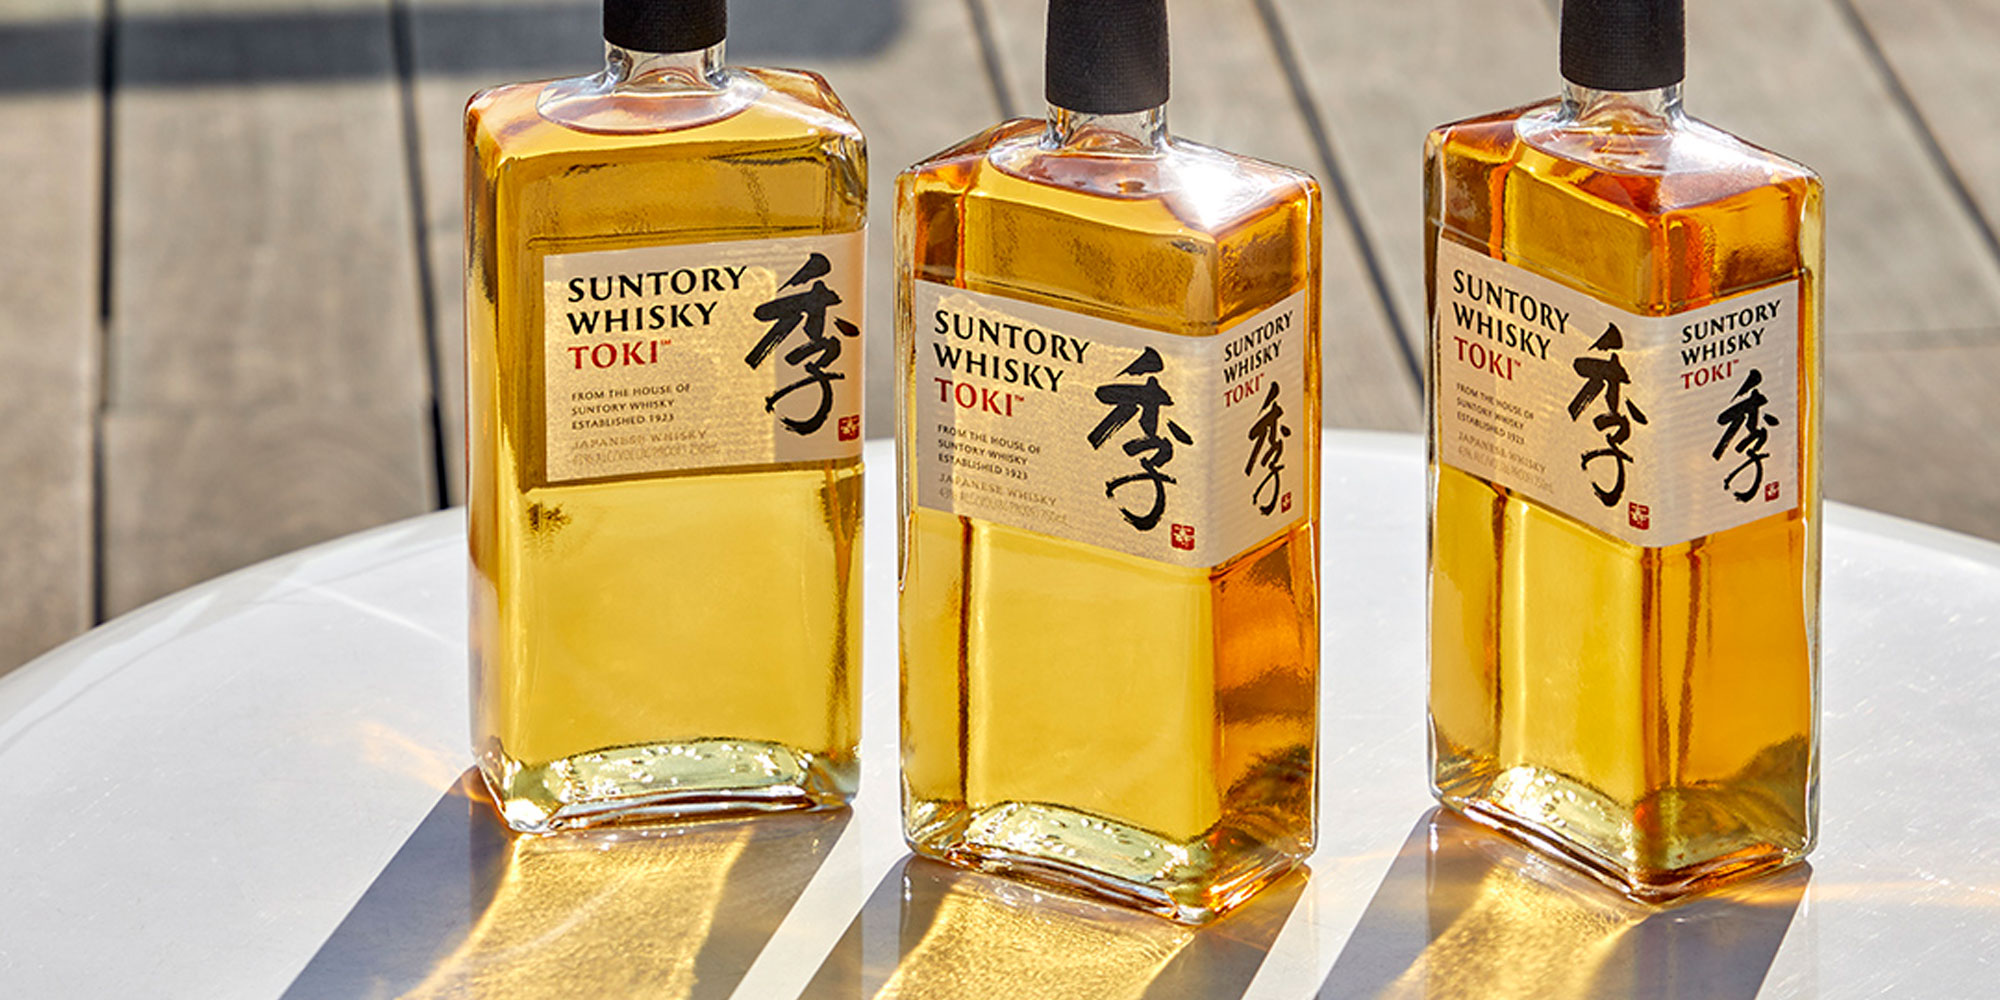 Toki® Whisky Blends | VinePair Modernity the Old World the With Japanese Best of